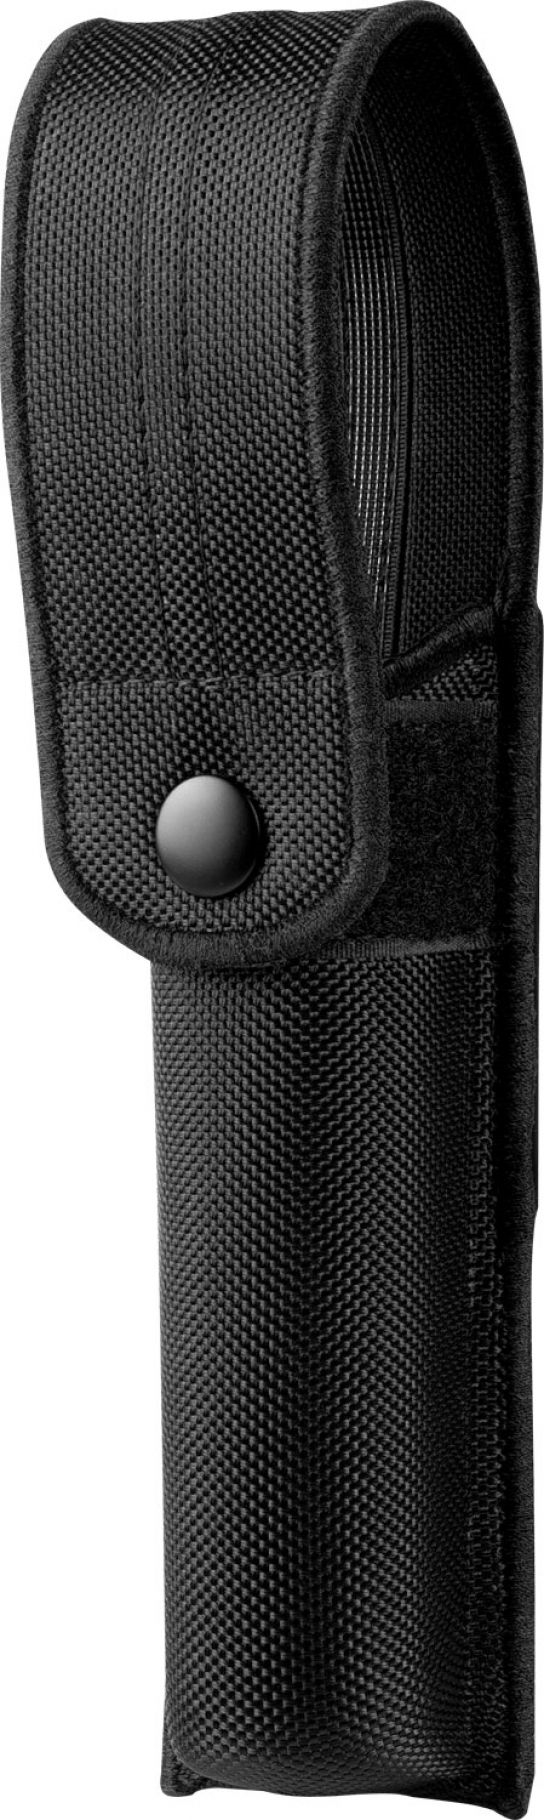 ASP Rotating Cover Scabbard